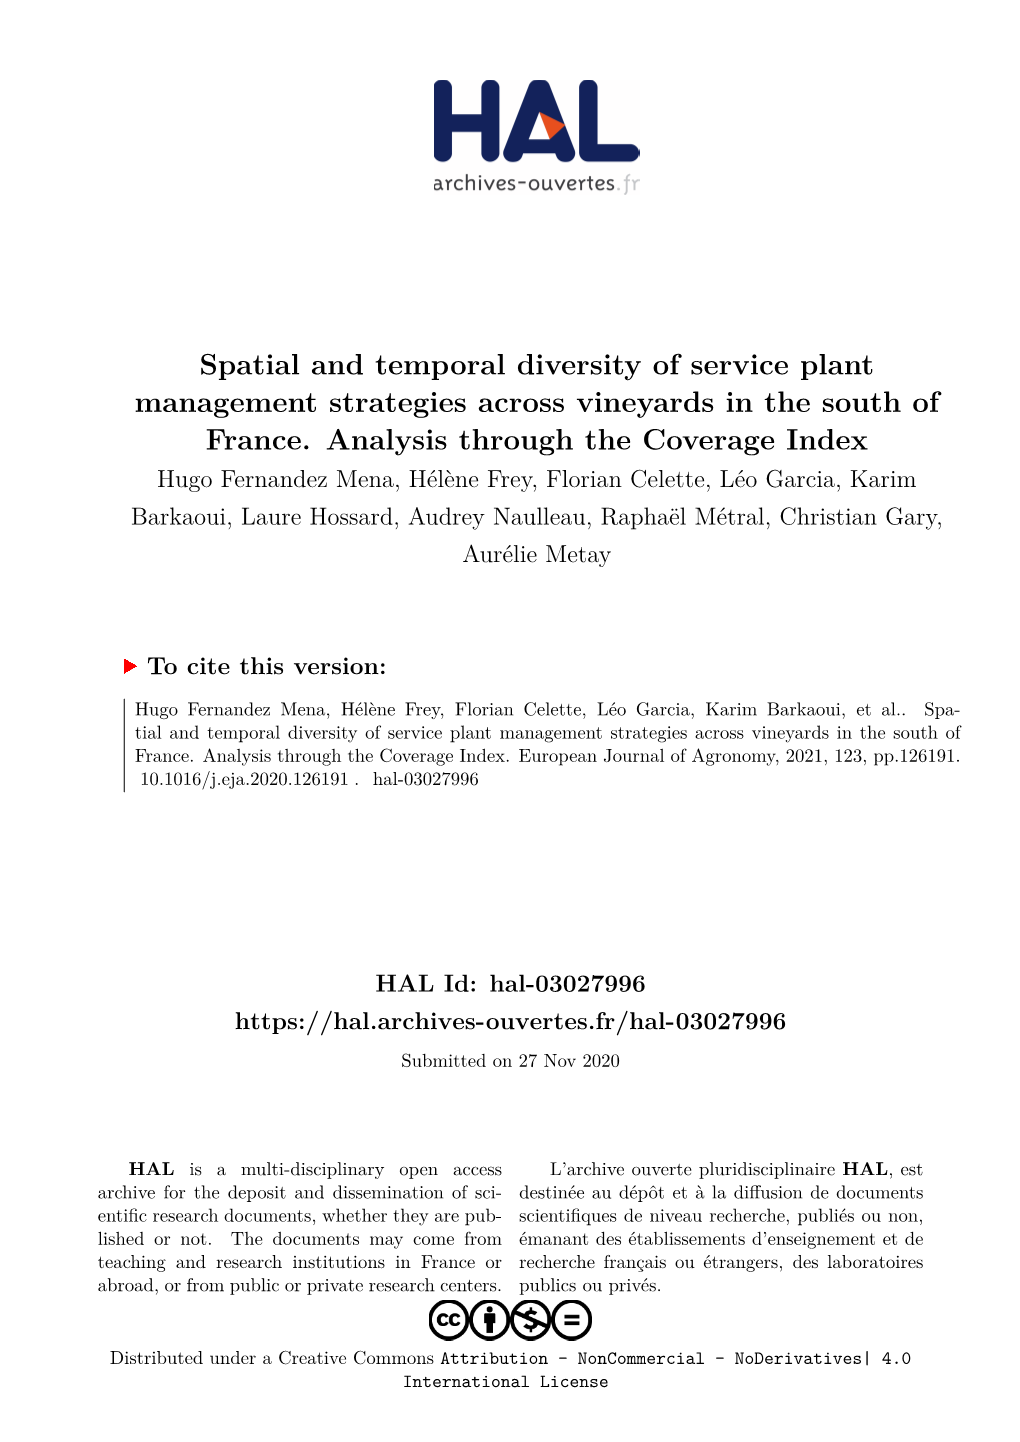 Spatial and Temporal Diversity of Service Plant Management Strategies Across Vineyards in the South of France